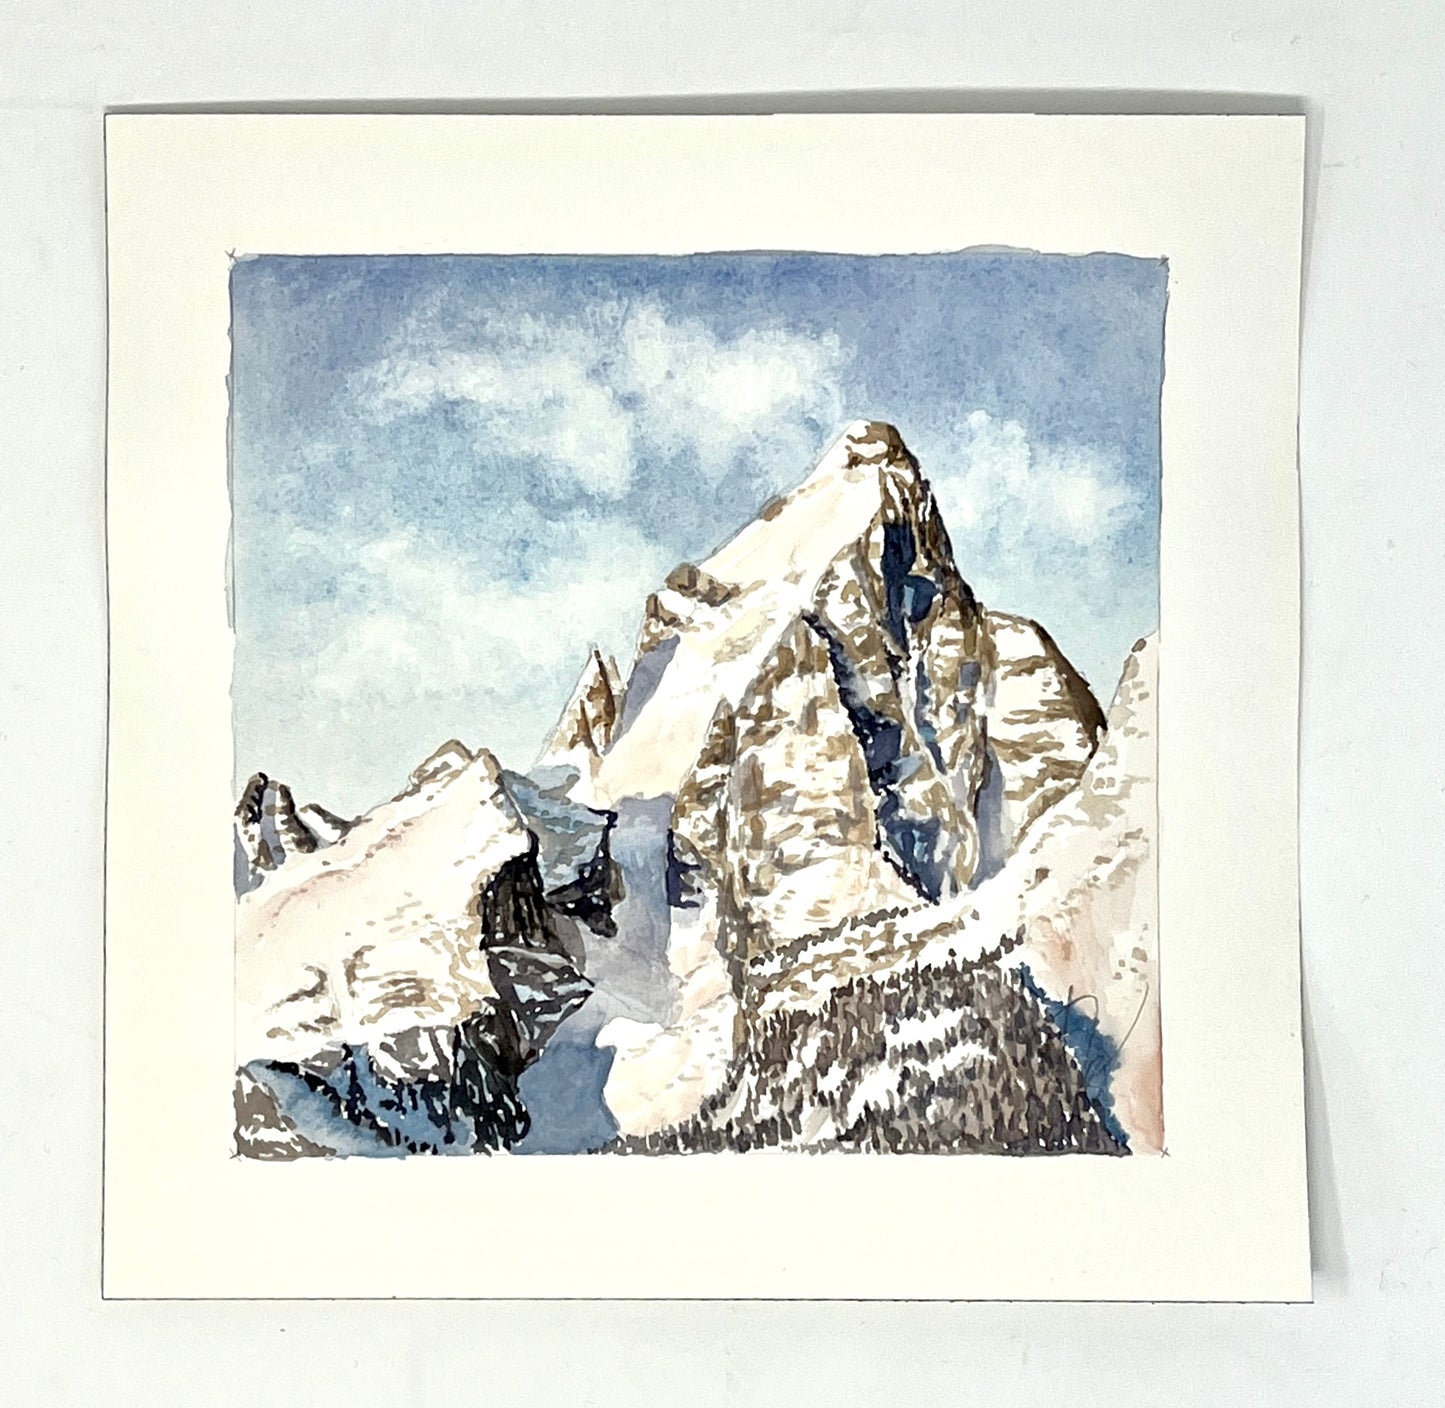 Natalie Connell: Watercolor 9 x 9 inches (unframed)